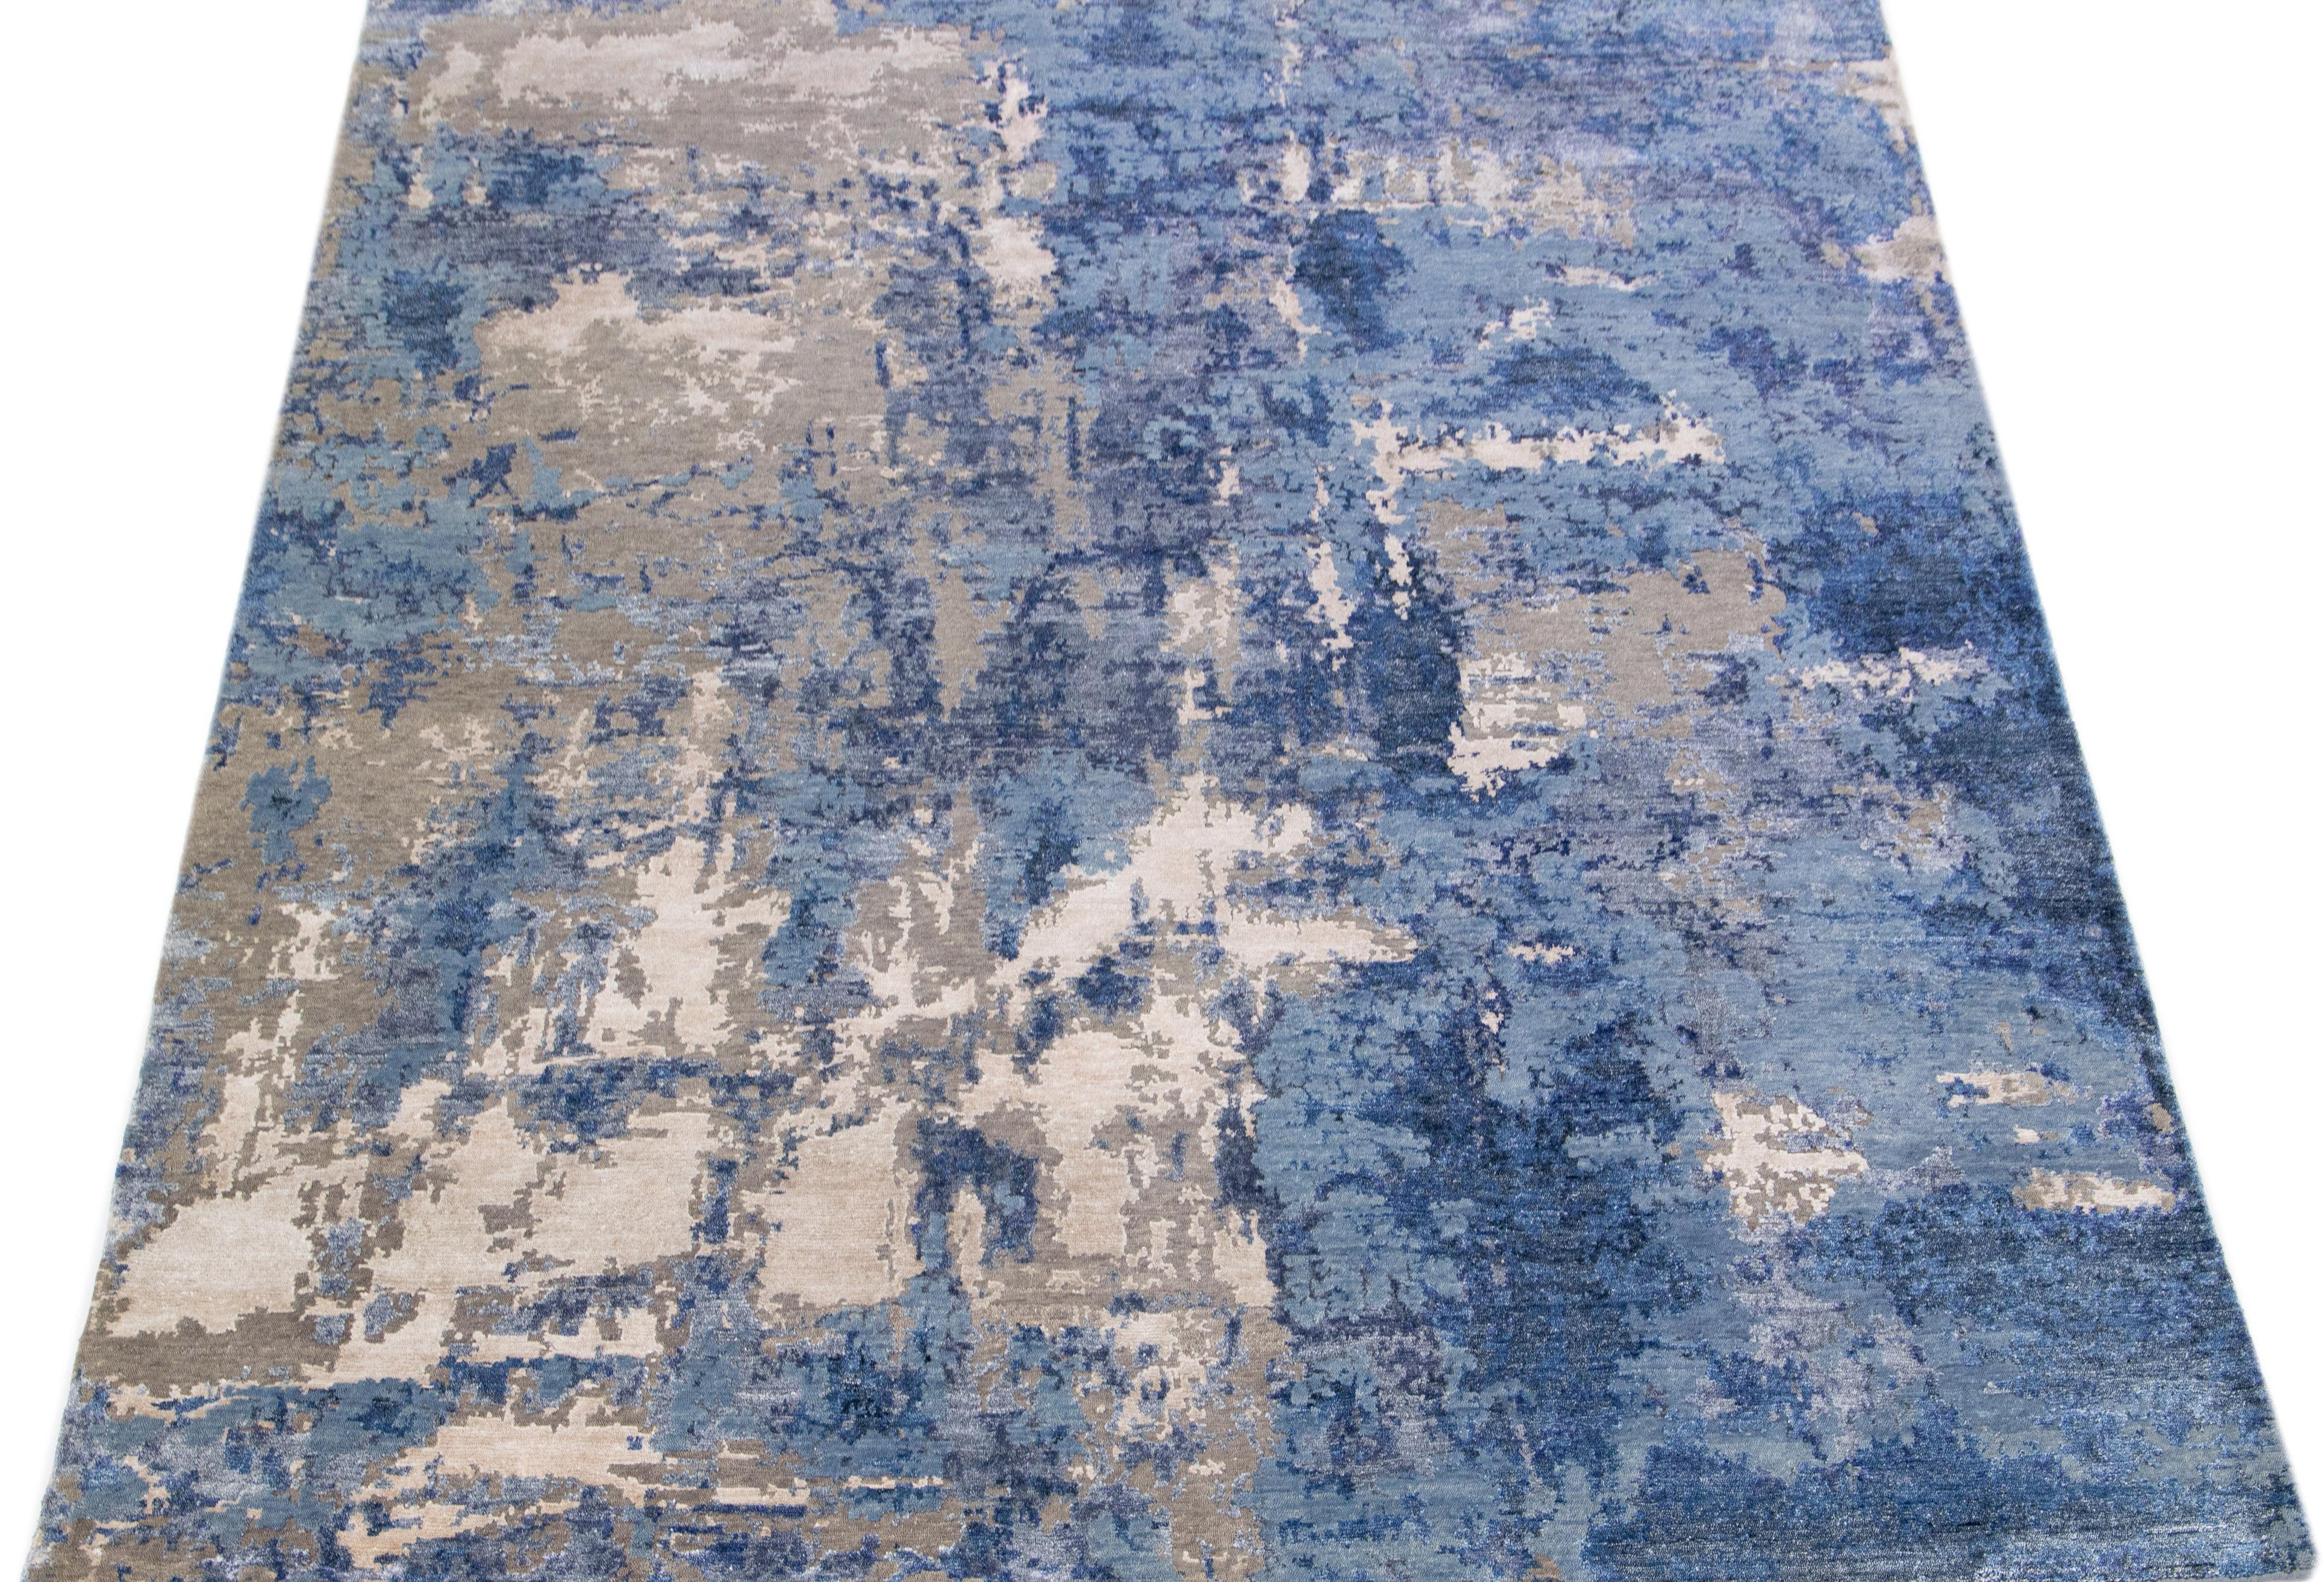 This Indian wool and silk blend rug features a blue field with an abstract pattern detailing brown and beige colors. Its composed materials provide robustness and longevity, while its ornamental design infuses any room with sophistication.

This